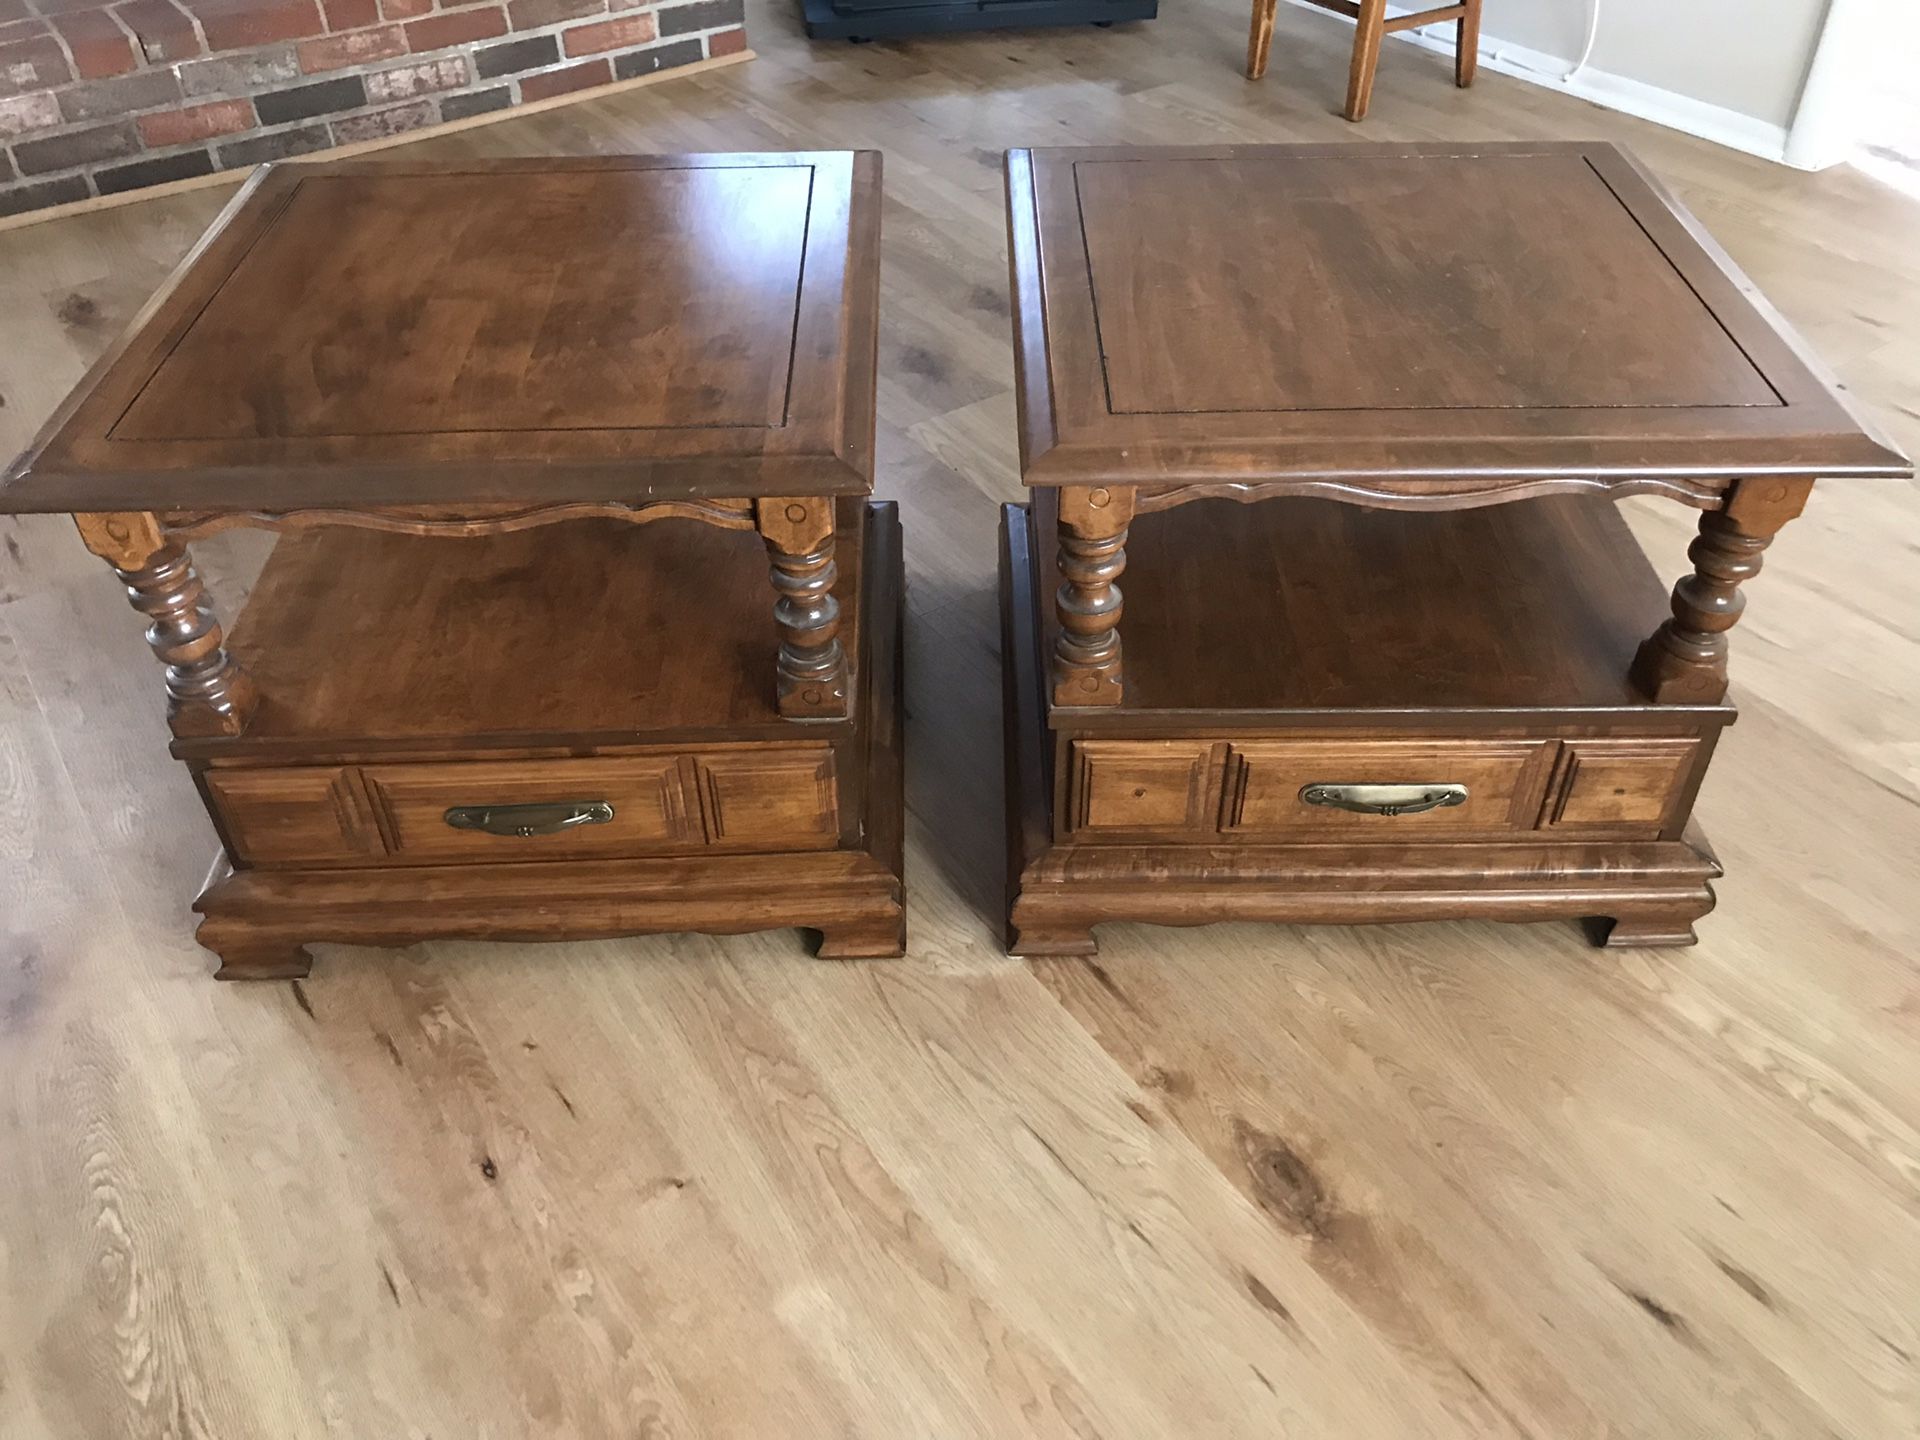 1970s Retro Maple End Tables - Fairfax/Chantilly (Greenbrier)